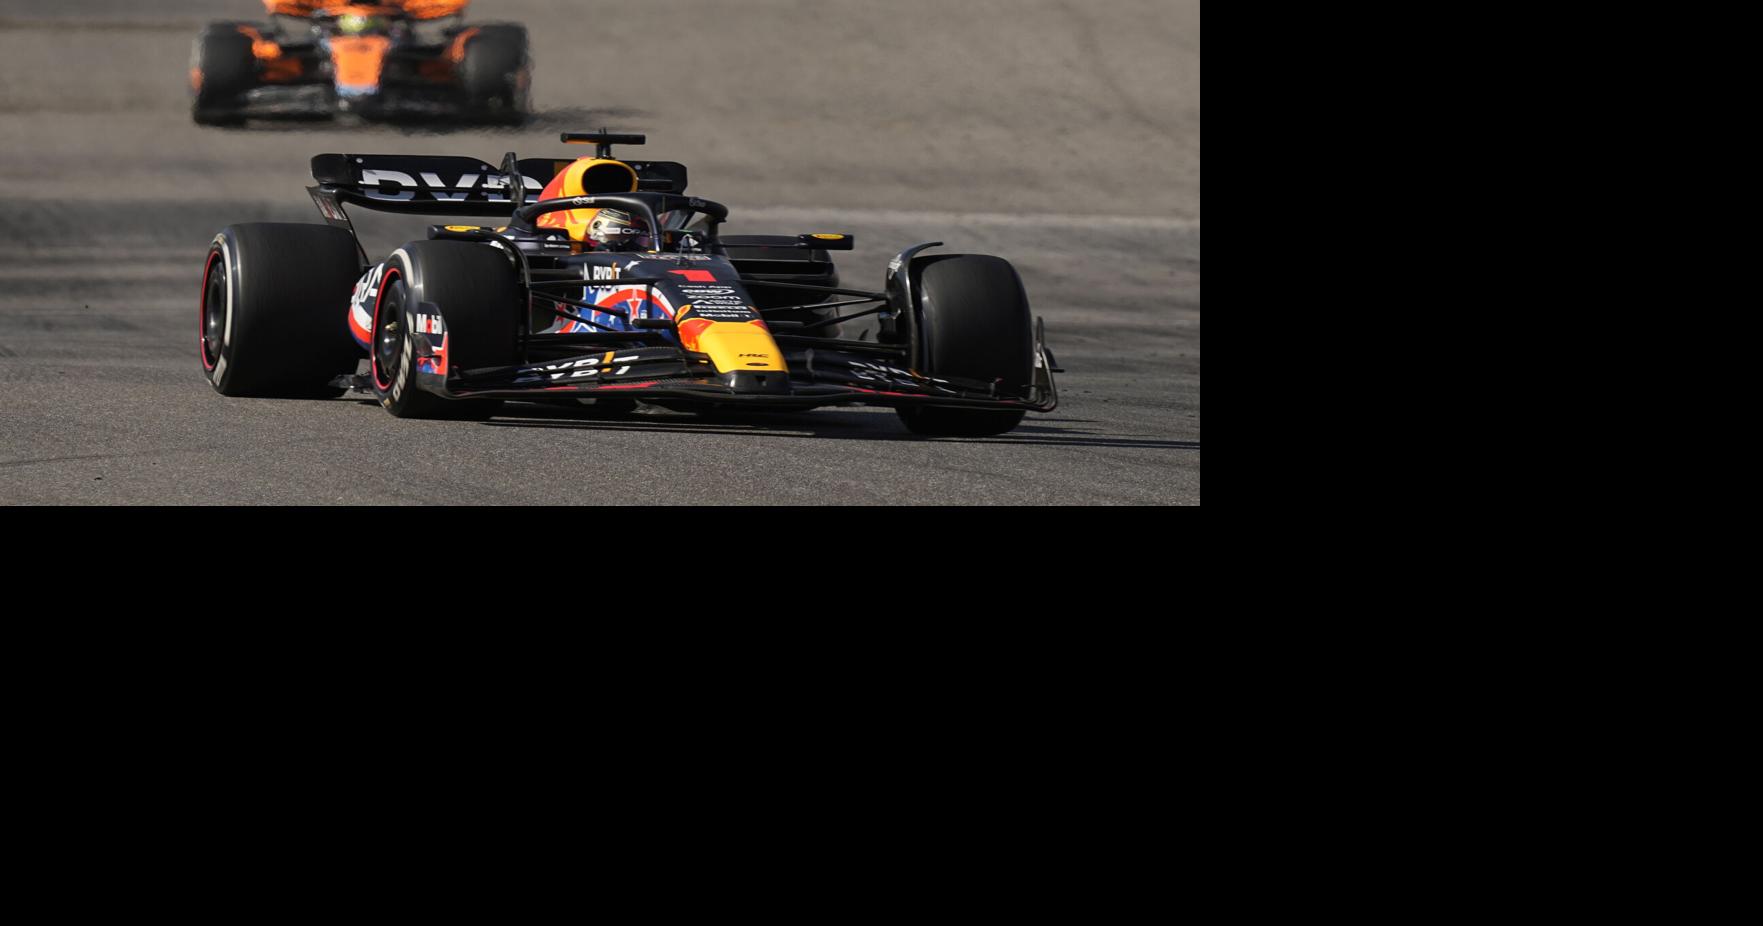 Verstappen earns hard-fought 50th career F1 victory